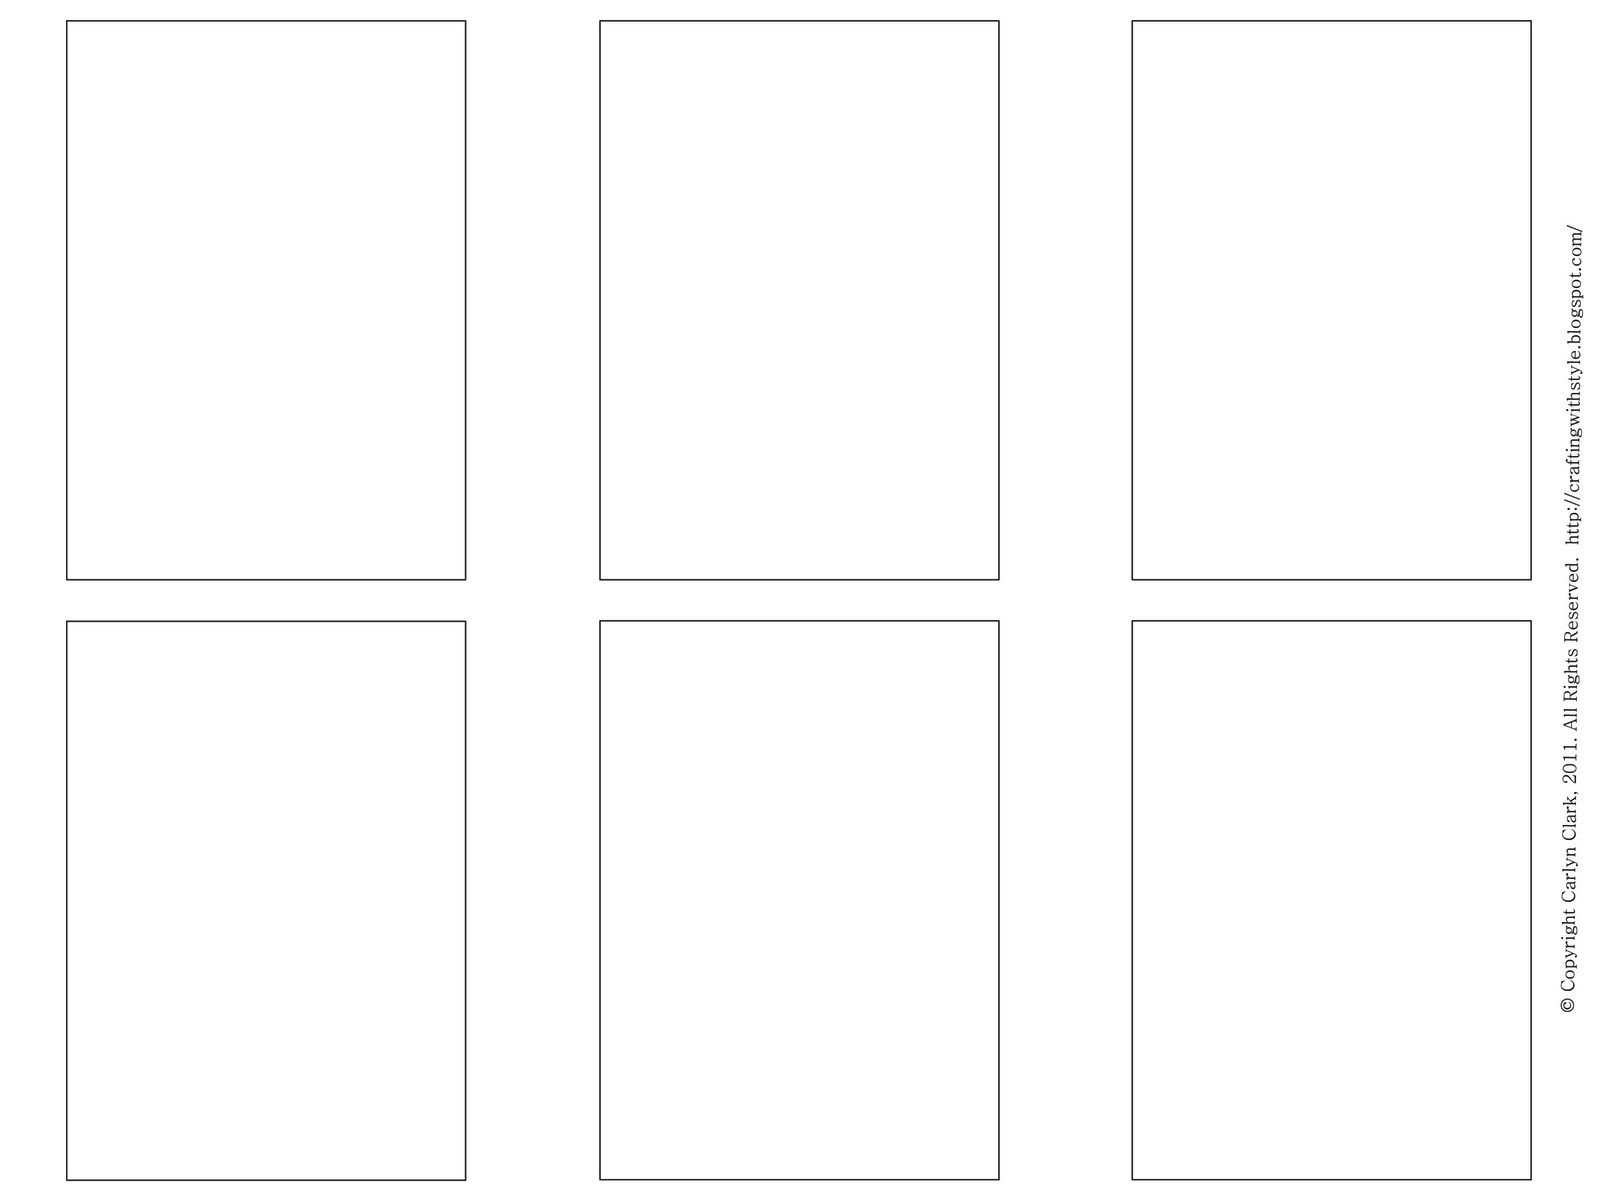 30 Free Trading Card Template Download | Simple Template Design With Regard To Free Trading Card Template Download